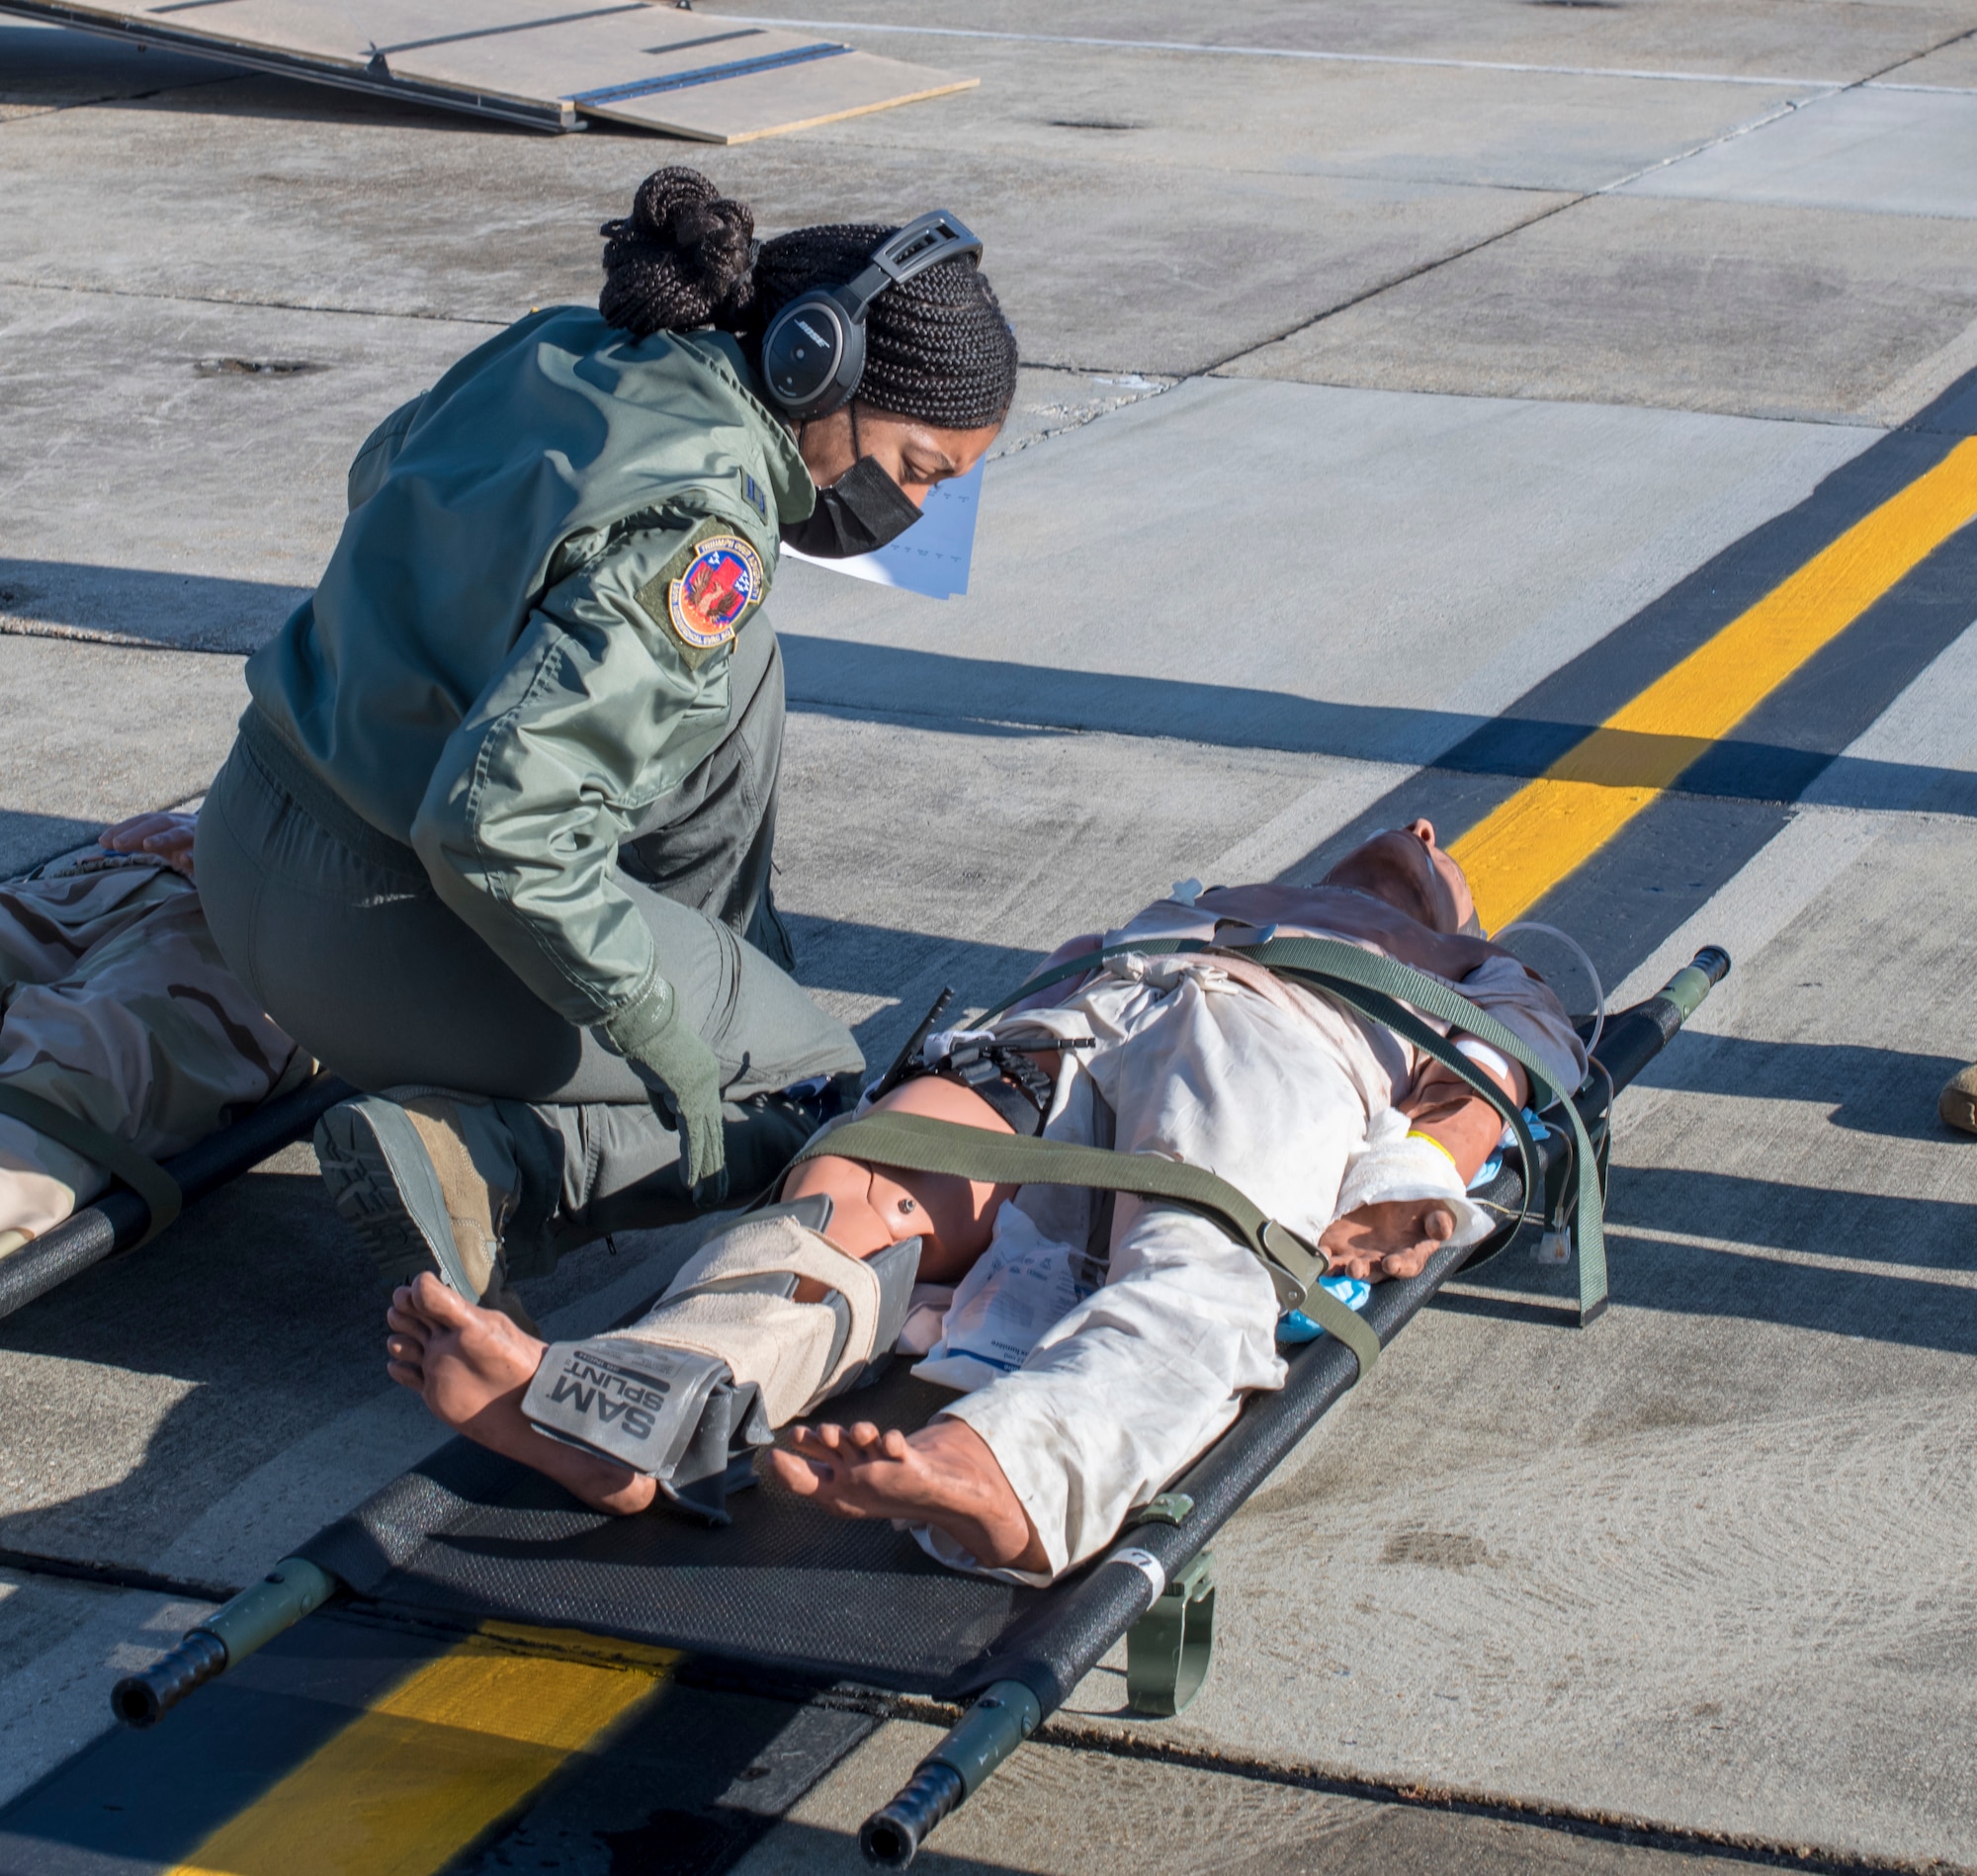 Capt. Toya Williams, 36th Aeromedical Evacuation Squadron flight nurse, tends to a "patient" during aeromedical evacuation training at Keesler Air Force Base, Miss., Jan. 13, 2021. Williams is a traditional reservist who, in the civilian world, works as a travel nurse based out of Los Angeles. (U.S. Air Force photo by Senior Airman Kristen Pittman)